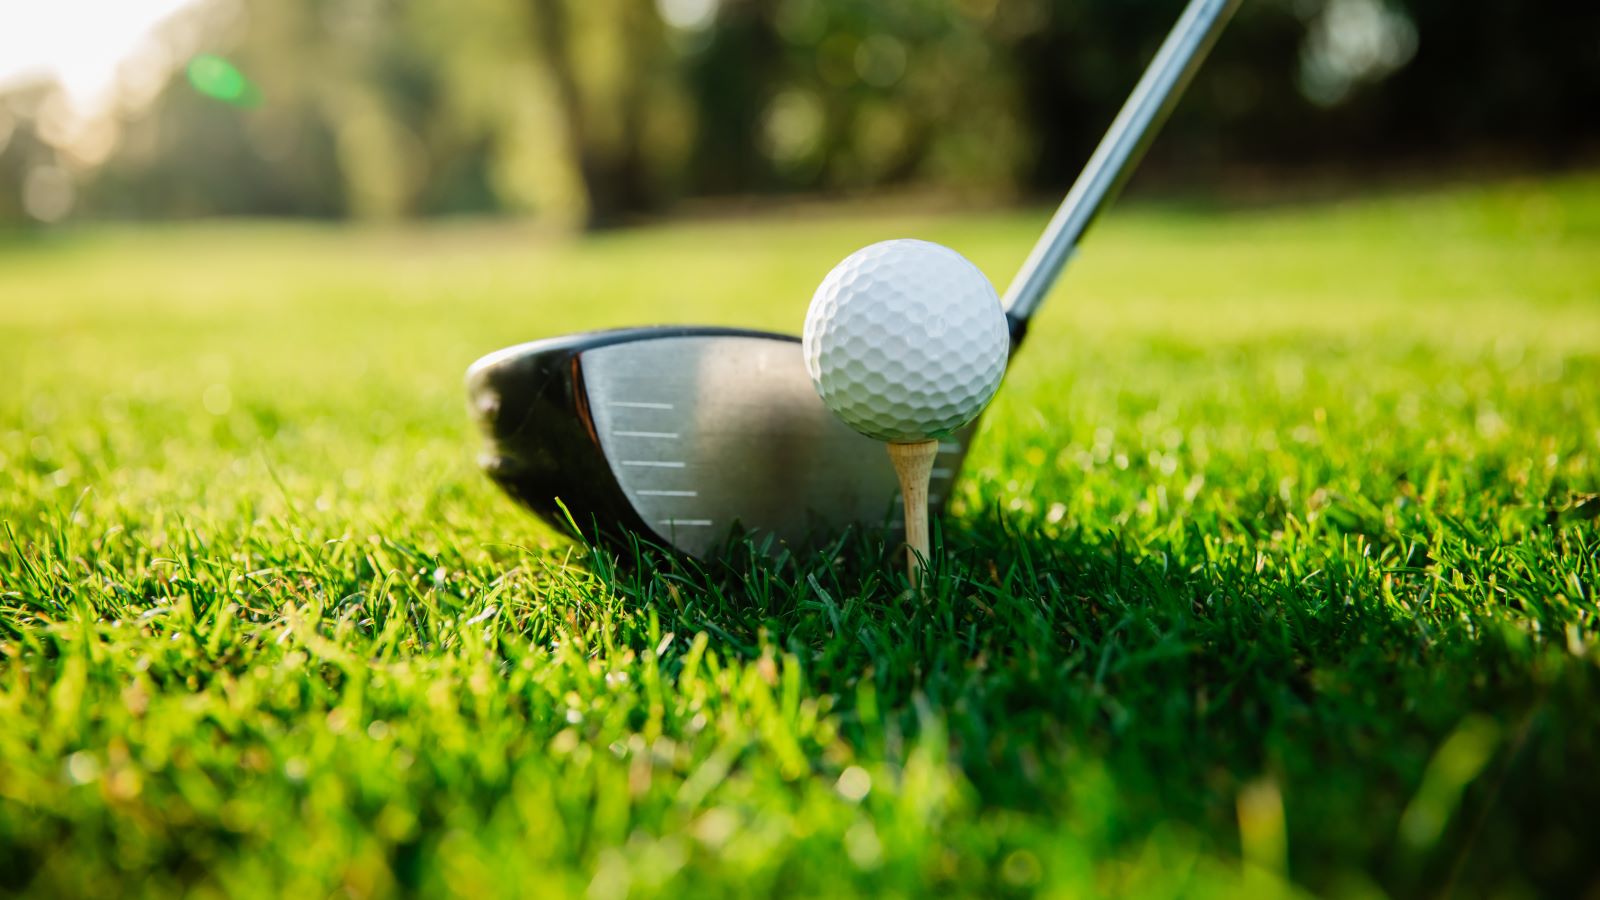 4 Common Golf Injuries and How to Avoid Them